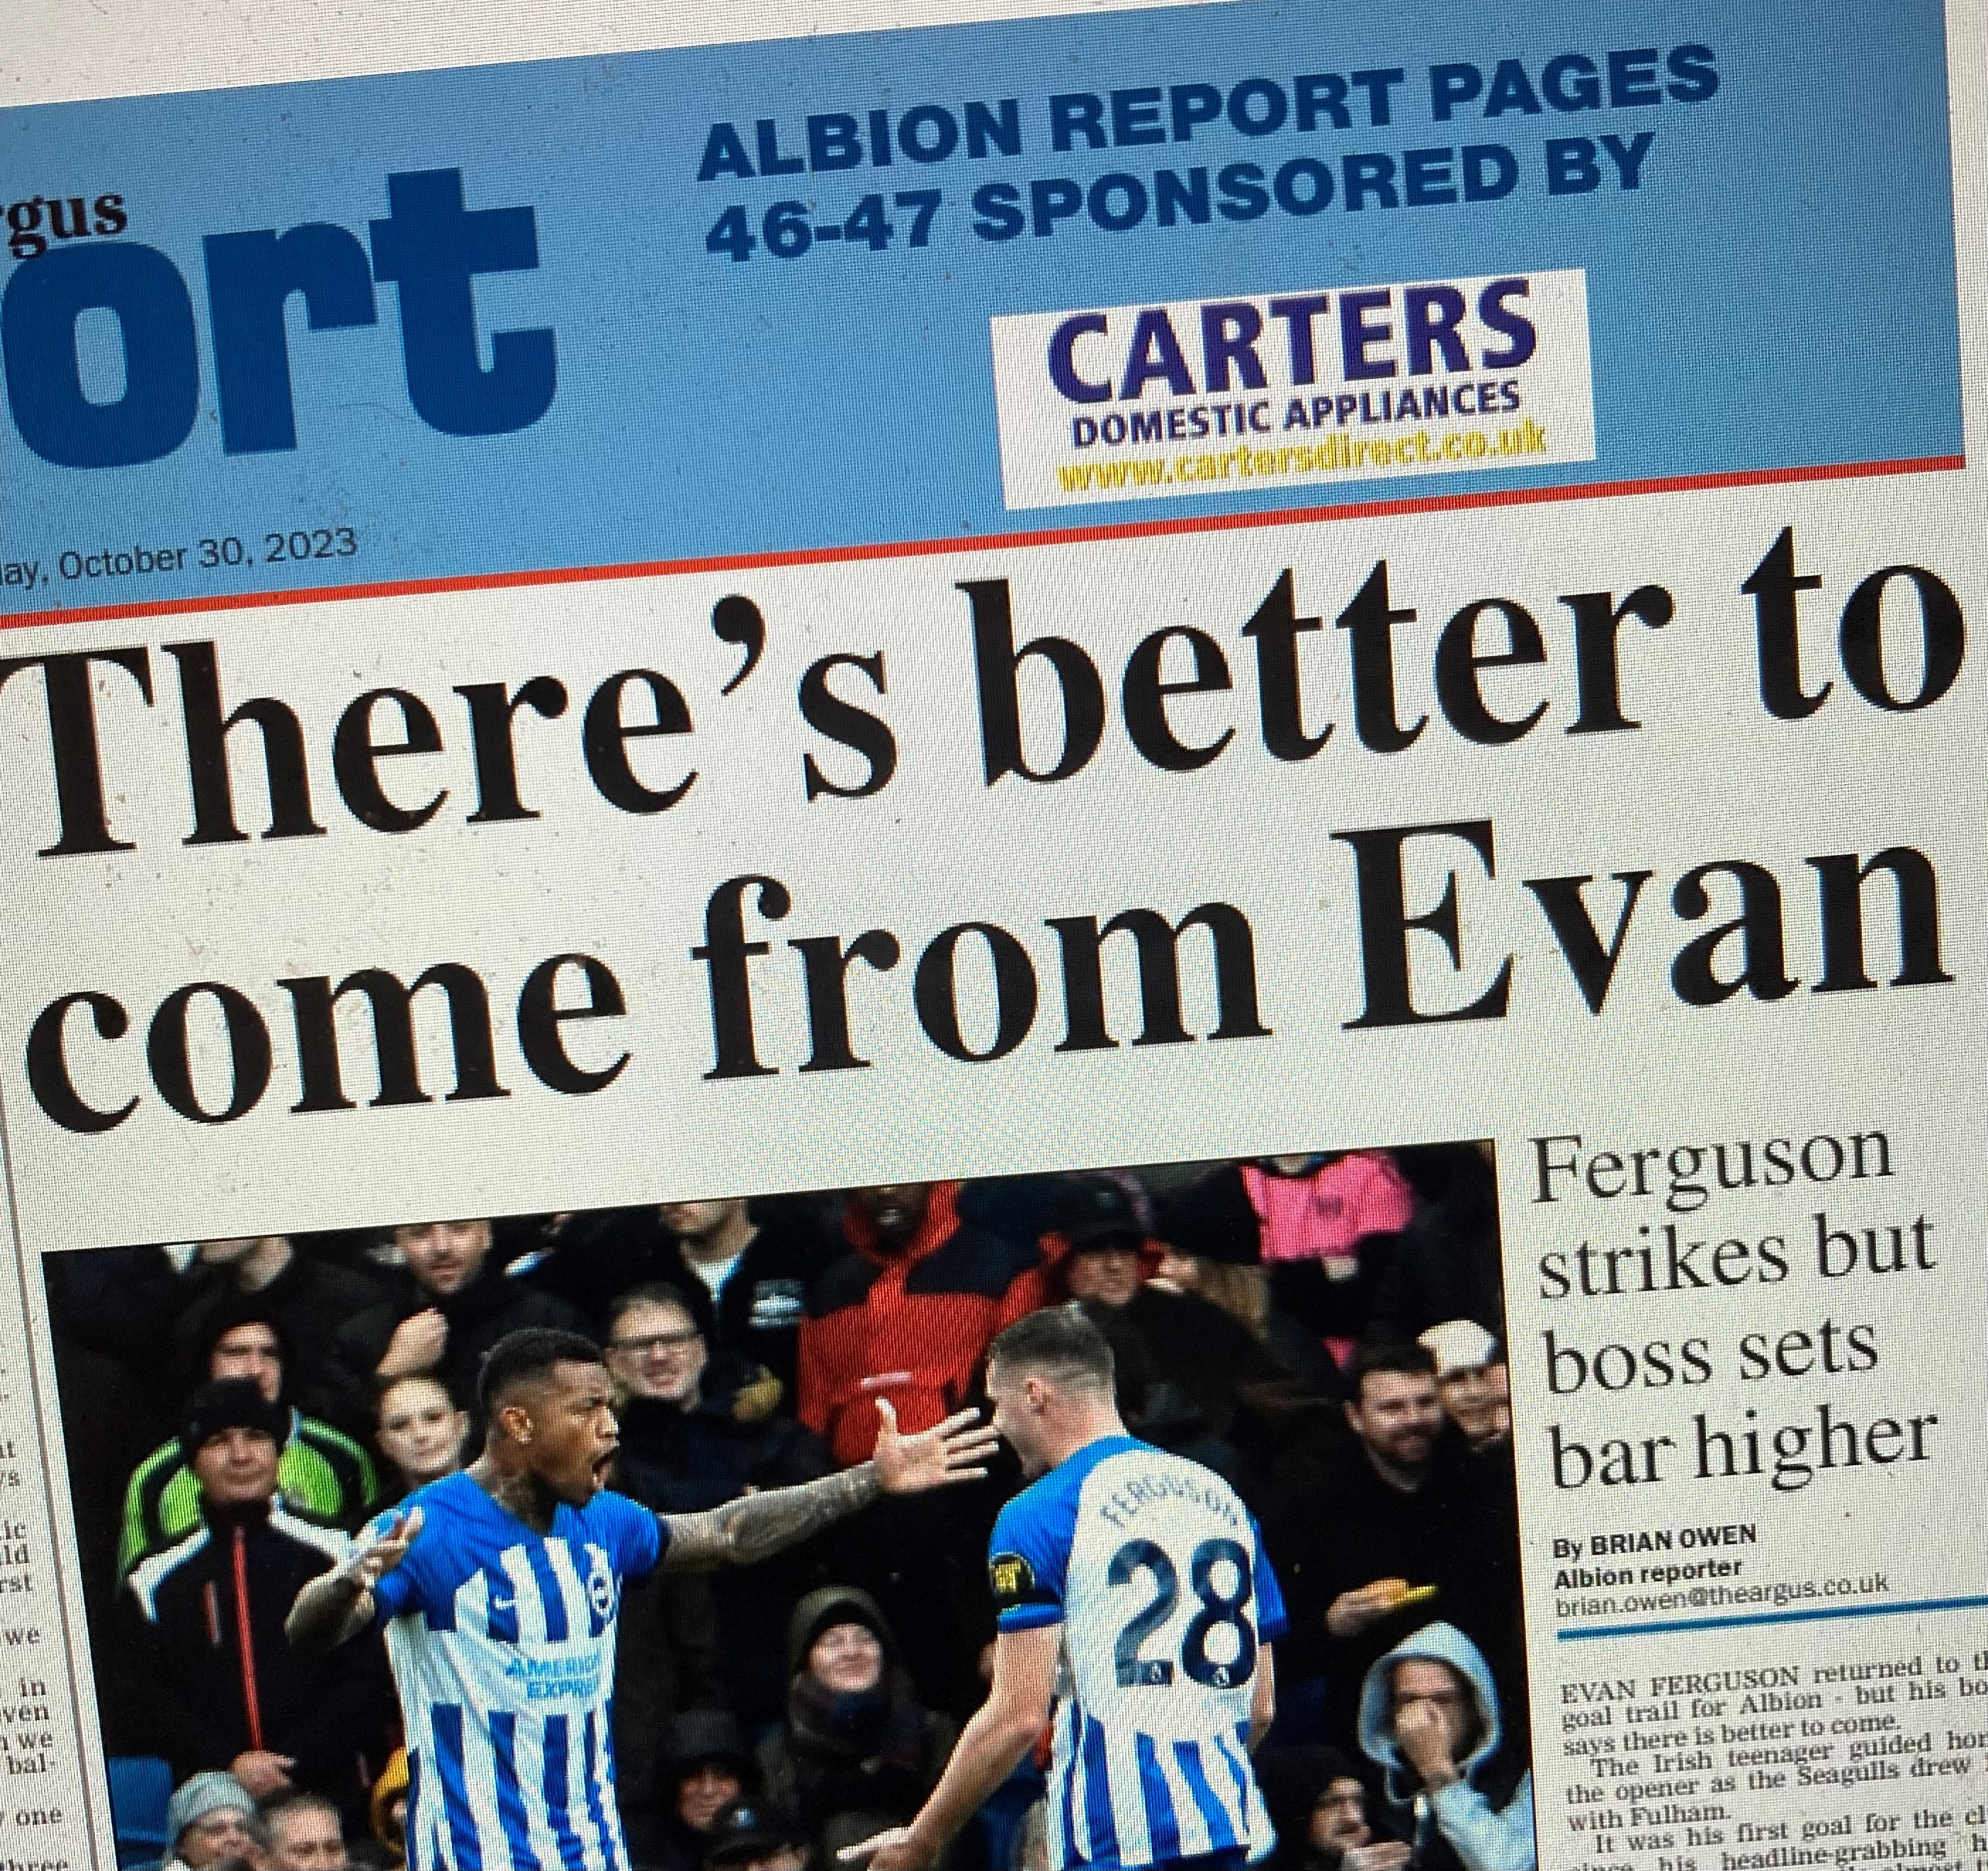 Win that got away - and red card chat. Brian Owen reviews Brighton v Fulham